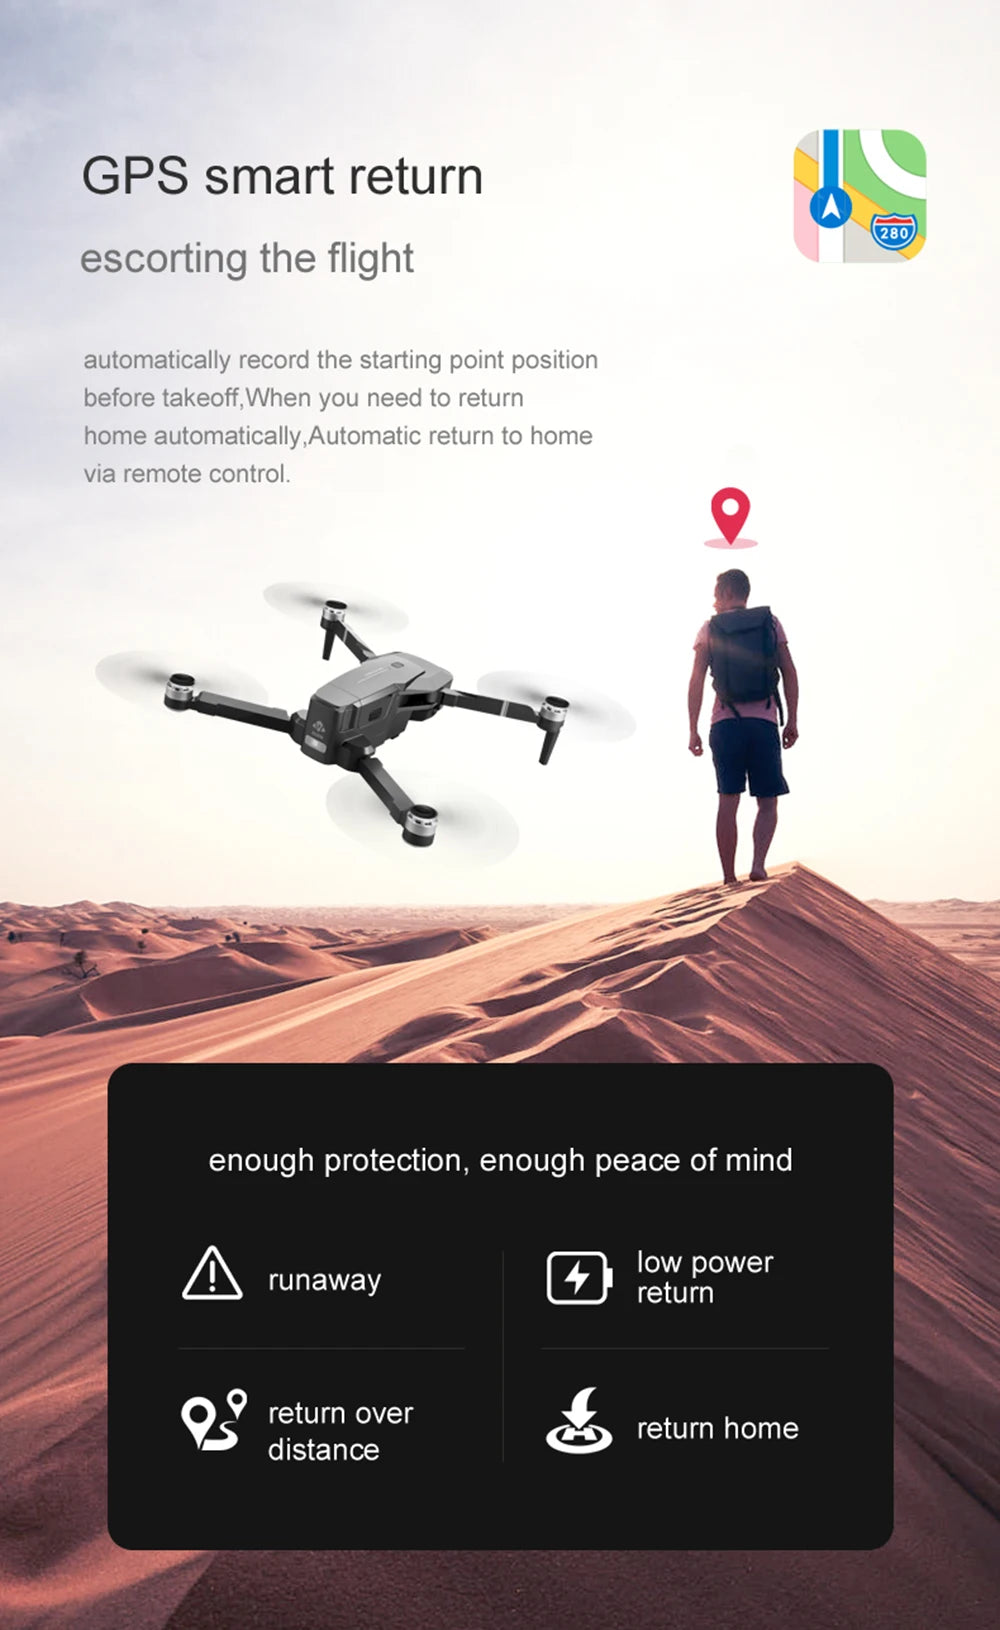 VISUO ZEN K1 PRO Drone, GPS smart return 280 escorting the flight automatically record the starting position before takeoff